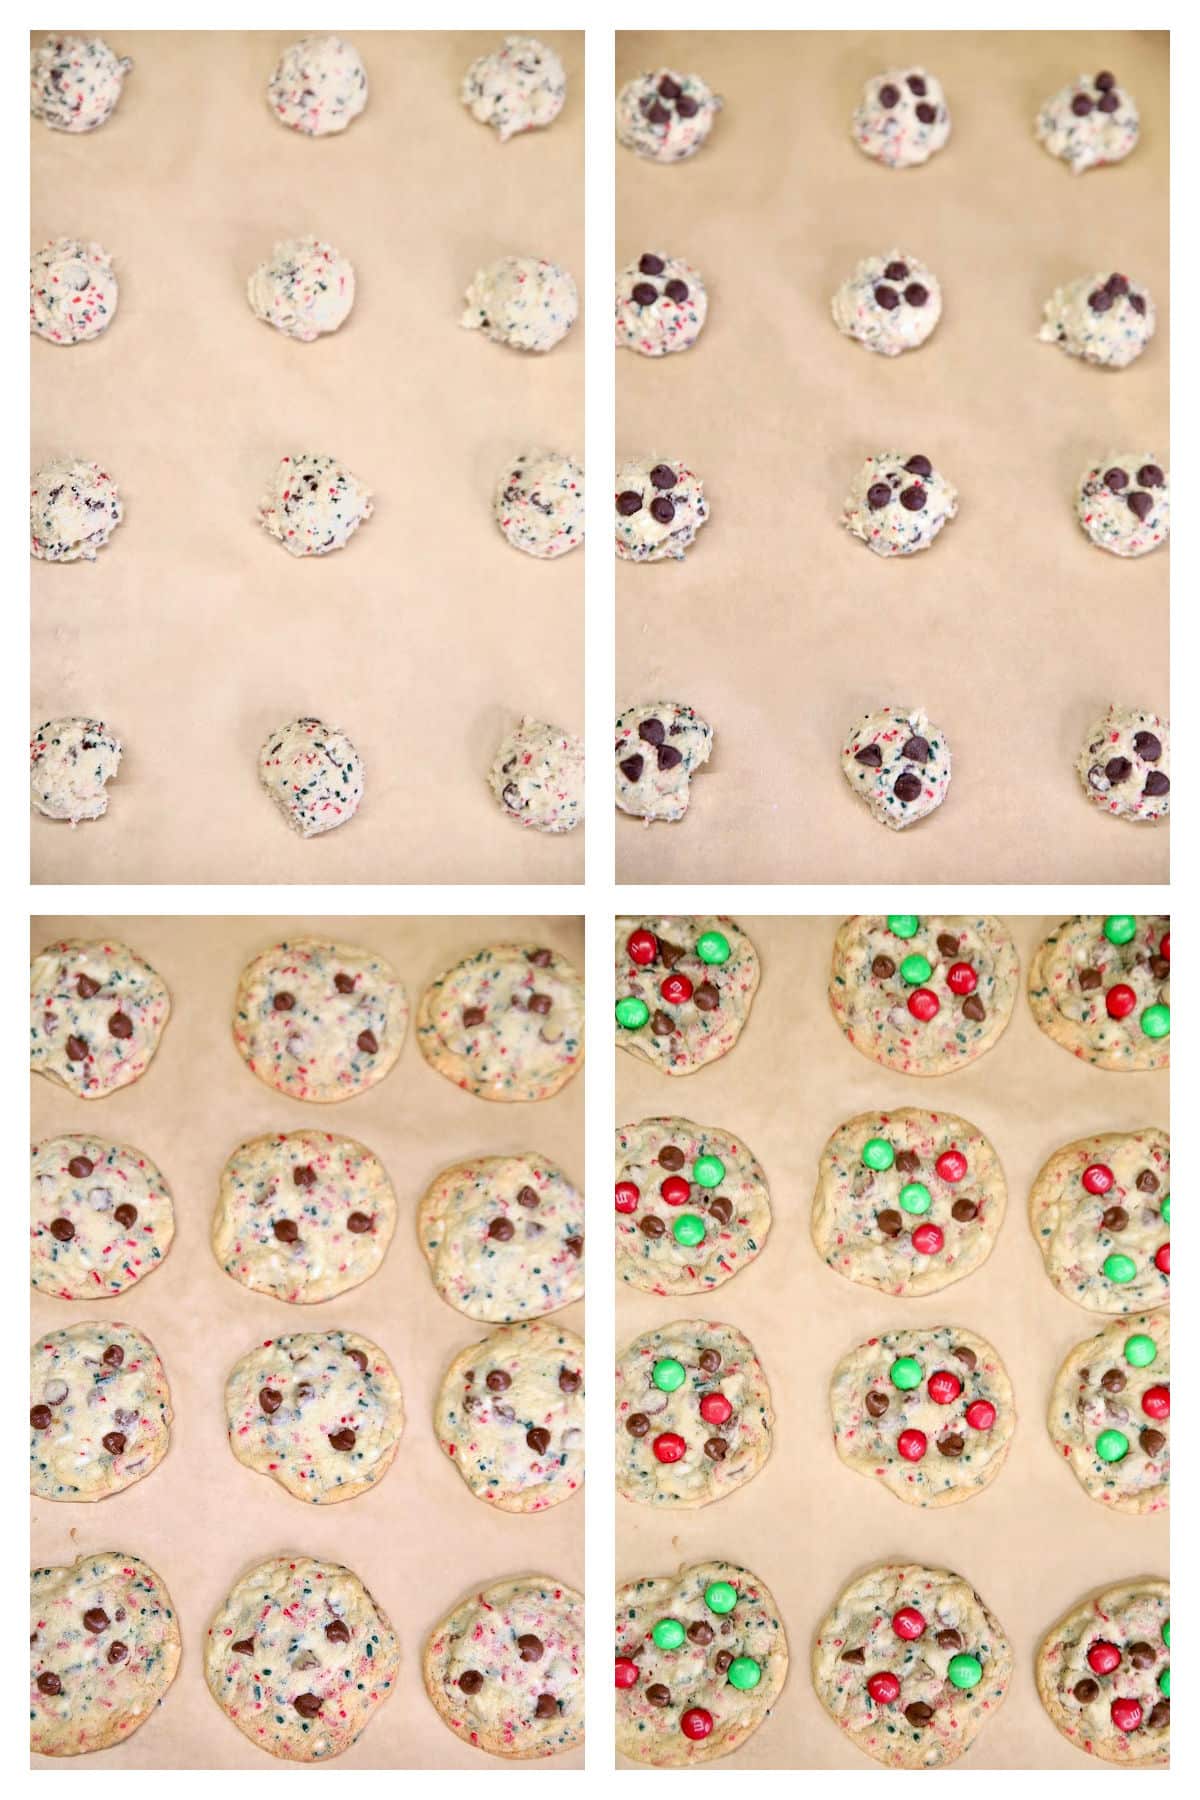 Baking chocolate chip cookies collage.